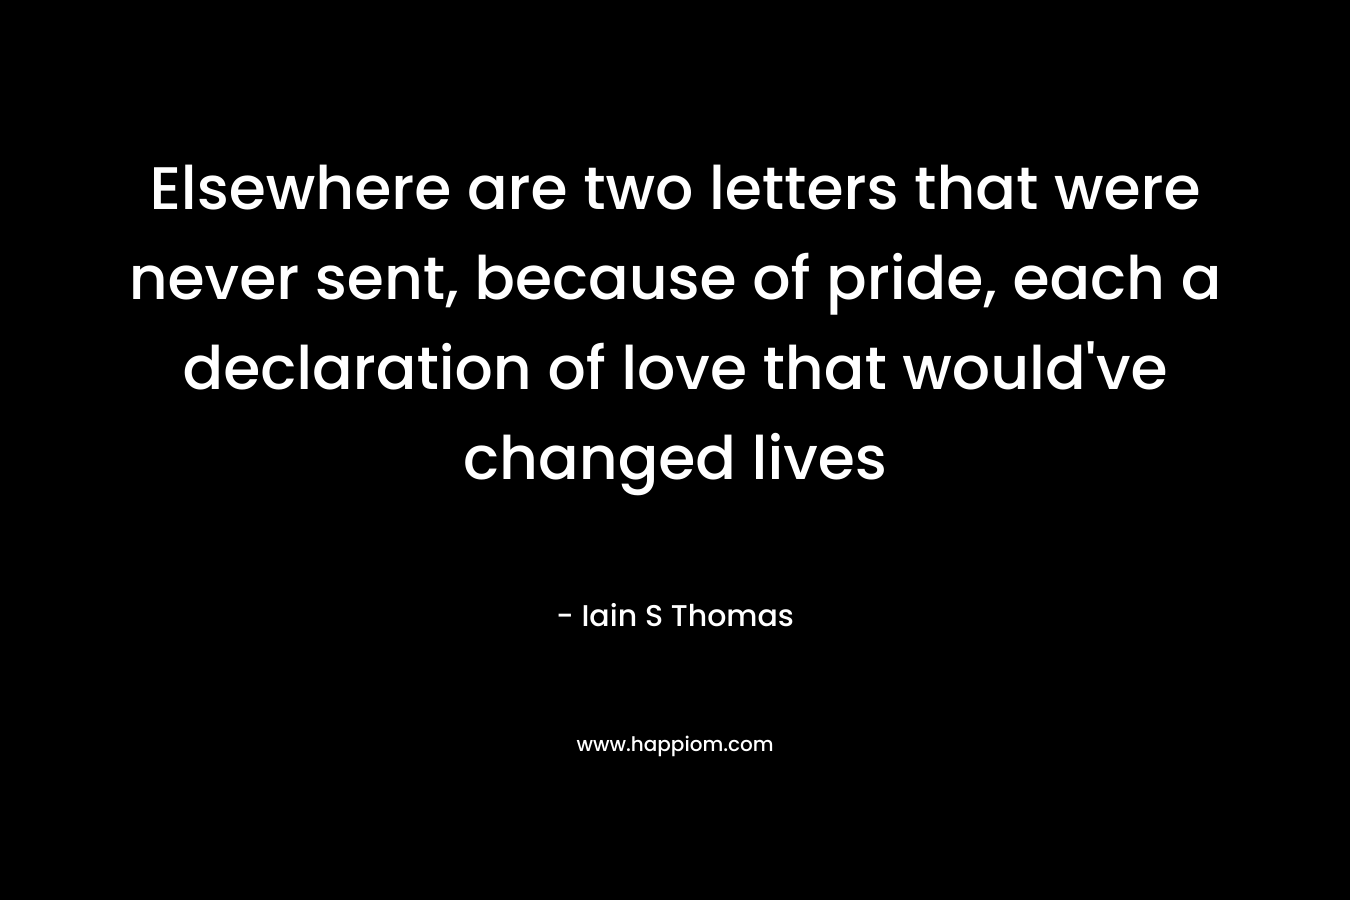 Elsewhere are two letters that were never sent, because of pride, each a declaration of love that would’ve changed lives – Iain S Thomas